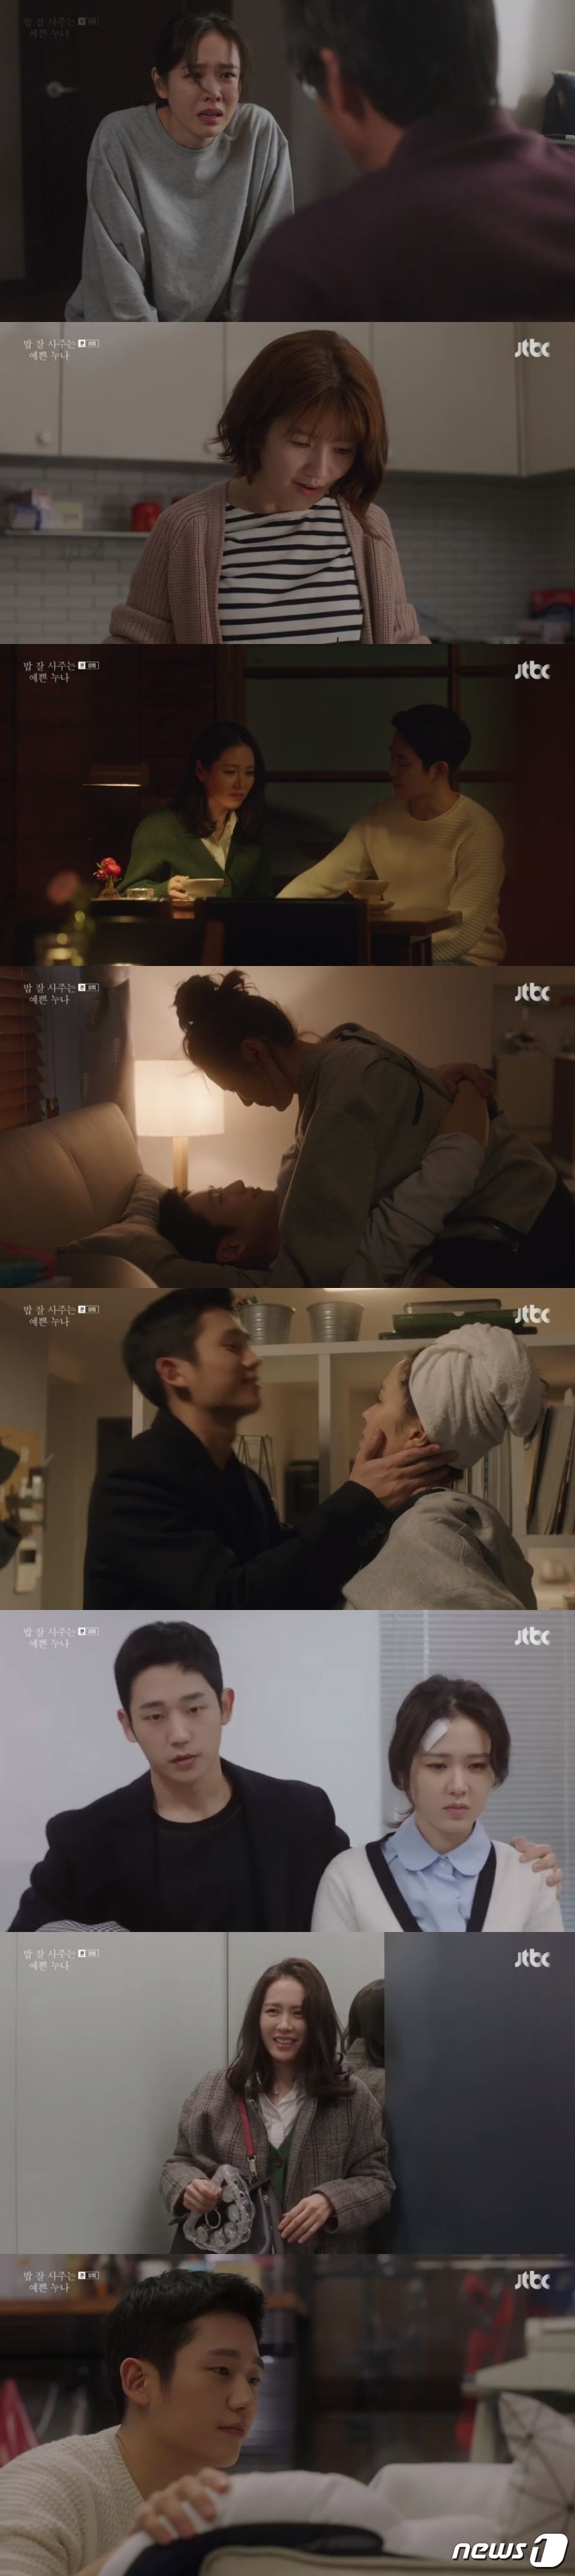 At the time the two decided to confess, the family knew first of this and foretold Cheamyo blue.JTBC Gumdodrama broadcast on the afternoon of the 21st, Lets get rice well is a beautiful older sister (screenwriter Kim director An Pansok), lets have a relationship with a colleague of the company of Seo Jun-hee (Jung Hae-In) The figure of Seo Jun-hee and Yoon Jin-ah (Son Ye-jin minutes) was drawn.Fellow of Seo Jun-hee, which has been to find a company drunk, knew still drunk Seo Jun-hee two people of the relationship was discovered sleeping Yoon Jin-ah visited Chetoda.Seo Jun - hee and Yoon Jin - ah decided to start a public love affair with this.Yoon Jin-ah said, I want to talk to the house.I can do it by myself, from the young brother Yoon Seung-ho (Kam Ha-jun) who knew beforehand to Seo Jun-hee How do you two Hyeojimyeong do you know Juninerang?I will live without seeing forever I showed a ceremony to listen to the word.I did not tell Seo Jun-hees sister Seokyeongseon yet.Seogyeongseon guessed the relationship between the two by looking at the portrait of Yoon Jin-ah drawn by Seo Jun-hee.At that time, Yoon Jin-ah kneeled before his father Yun Sang-gi (Oh ​​Man-seok minutes) and tried to confess the relationship with Seo Jun-hee.Yun Sanggi revealed that he already knows the relationship between Yoon Jin-ah who tears, Its ready to listen anytime and Where is Juana?On this day Seo Jun - hee ran to the emergency room after finding the released Yoon Jin - ah who was kidnapped by Lee Kyu - min.Lee Kyu-min raced Yoon Jin-ah in the car, but lost reason to stop Seo Jun-hees phone and stopped the car on the shoulder.I found Yoon Jin-ah in the emergency room, and Seo Jun-hee showed the appearance of losing reason as to grab the chest of Lee Kyu-min being pulled by the police.However, in front of Yoon Jin-ah, he encouraged me that Are you OK? Thats it! And embraced the surprised lover.With the treated Yoon Jin-ah on the car, Seo Jun-hee drove a silent car.Yoon Jin-ah looked at the face of such Seo Jun-hee and asked, Are you an angry sickle? Seo Jun-hee said I have heard certainty what I could clearly do and that idea It really cramped what wished for the wrong way.I regretted very much.Despite saying it is disgusting, I got a cell phone early purchase girl, pick it up quickly, put it by myself and talk about it released the heart I was worrying about.This complained that Yoon Jin-ah was not surprised, Seo Jun-hee confessed that now it is not true Yoon Jin-ah live.Their love deepened.That night Seo Jun - hee will not tell myself Yoon Jin - ah has a great deal of faintness, and the two battled emotions with trivial problems.Usually Yoon Jin-ah approaches Seo Jun-hee and said, My situation is embarrassing because its embarrassing and bad, so its frustrating.I talked frankly, Why I felt so foolish like that, I regret it is not possible for you than me, so I frankly talked and they kissed closely and confirmed affection.The heart of Seo Jun - hee was more confident than usual.He showed up to the companys representatives business trip suggestion three months I can not go for the girlfriend, and showed until prepared to resign that cut to cut off in the intimidation.Yoon Jin-ah at the same time felt gratitude and sorry for the story that Seo Jun-hee got instinct in advance about the accident on the day when he was gone by his colleague at work.Yoon Jin-ah definitely ended the relationship by arranging the date passbook with Lee Kyu-min.Seo Jun-hee wants to dance like that to Yoon Jin-ah.Lets make it clear without noticing between us.I want to do instead, Yoon Jin-ah grabbed Seo Jun-hees hand and agreed with why did I pull it out? Subsequently, Yoon Jin-ah who participated in the female employee gathering was drunk and went to his company to see Seo Jun-hee in that state.Drunk Yoon Jin-ah gave a greeting even if he did not dare say I came to see his boyfriend to an employee, and gave me laughter in taking out the bags tambourine